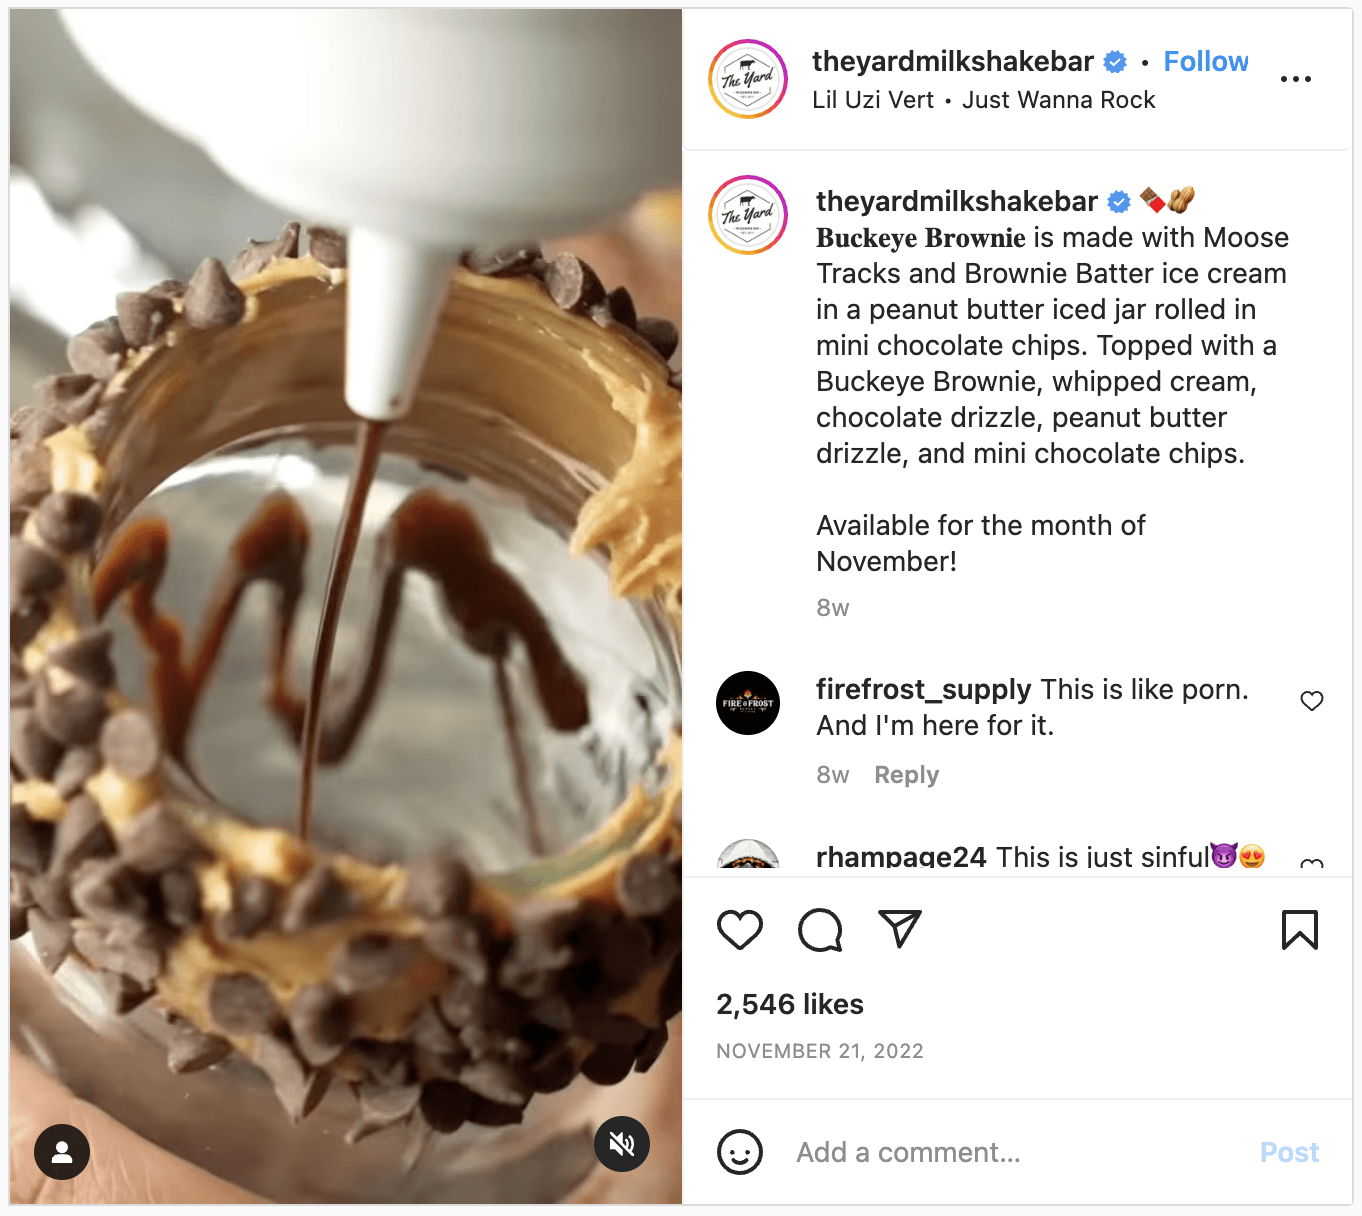 The Yard Milk Shake Bar Instagram post about their products